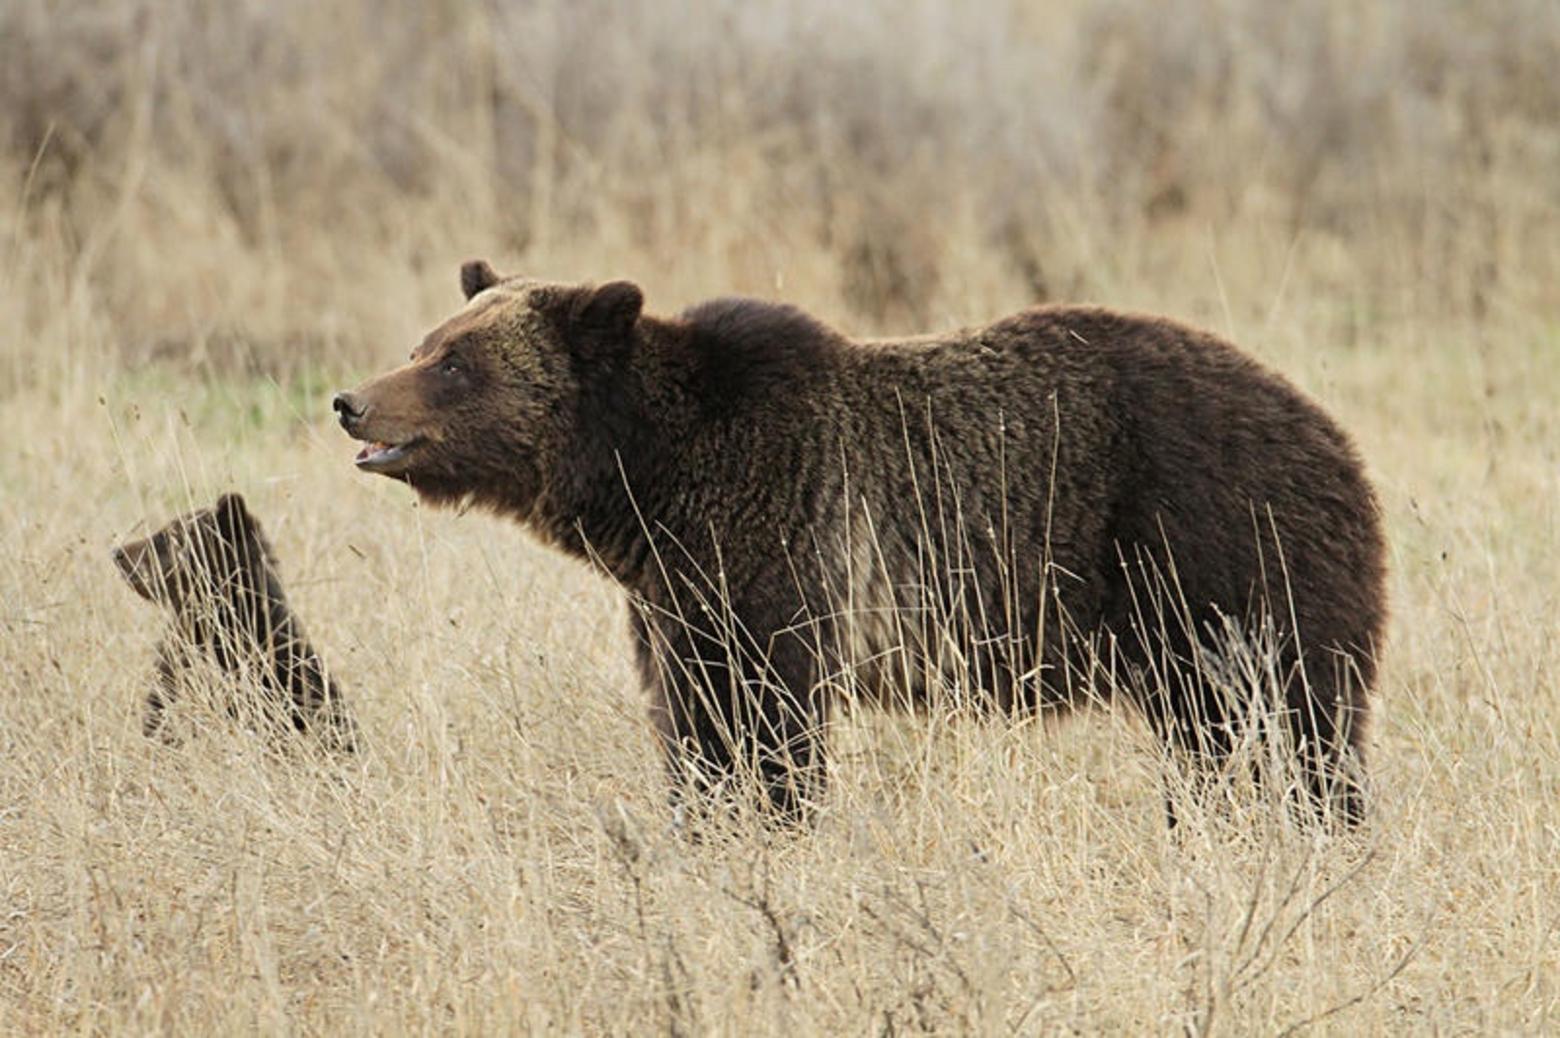 III. The Controversy Surrounding Baiting in Bear Hunting